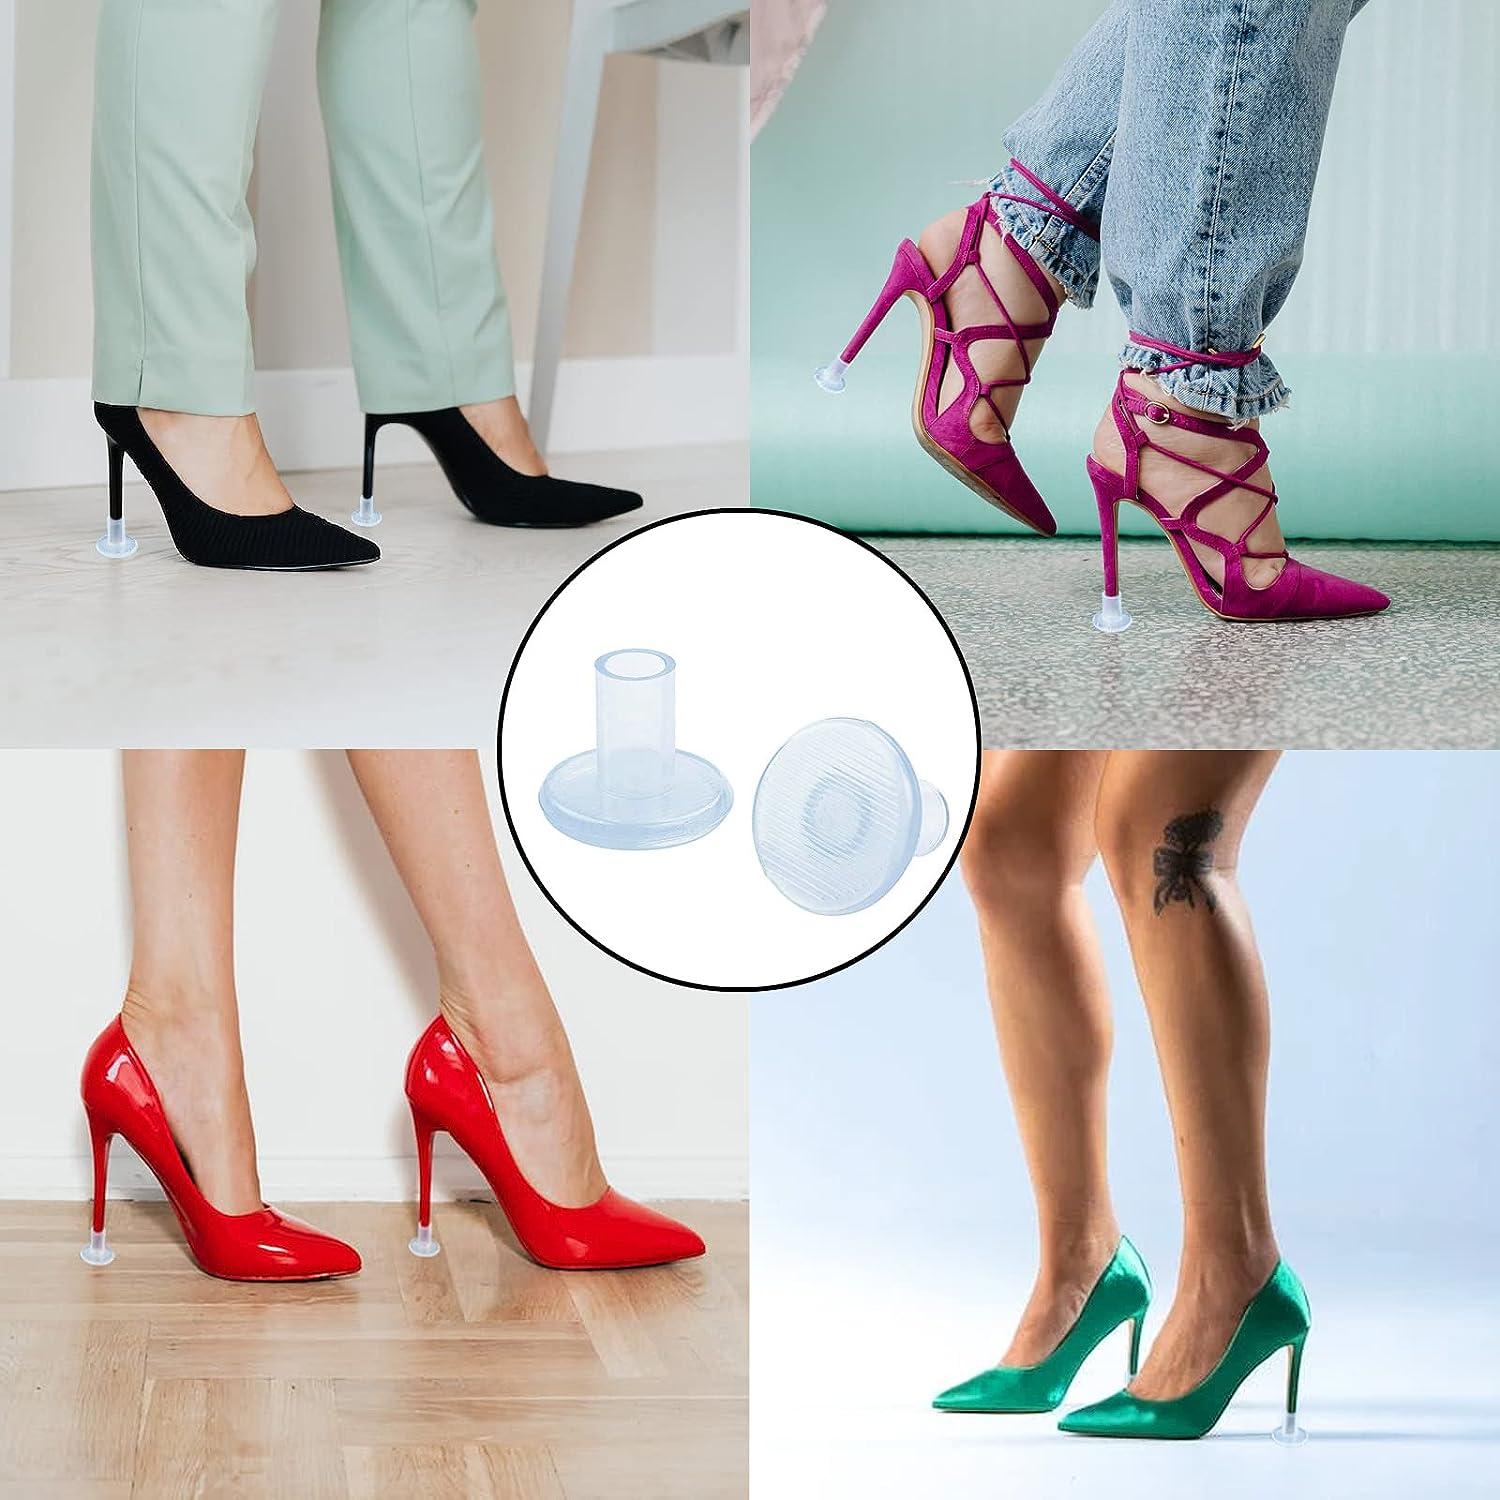 Heel cover - Heel protection for high heeled shoes | SmartaSaker